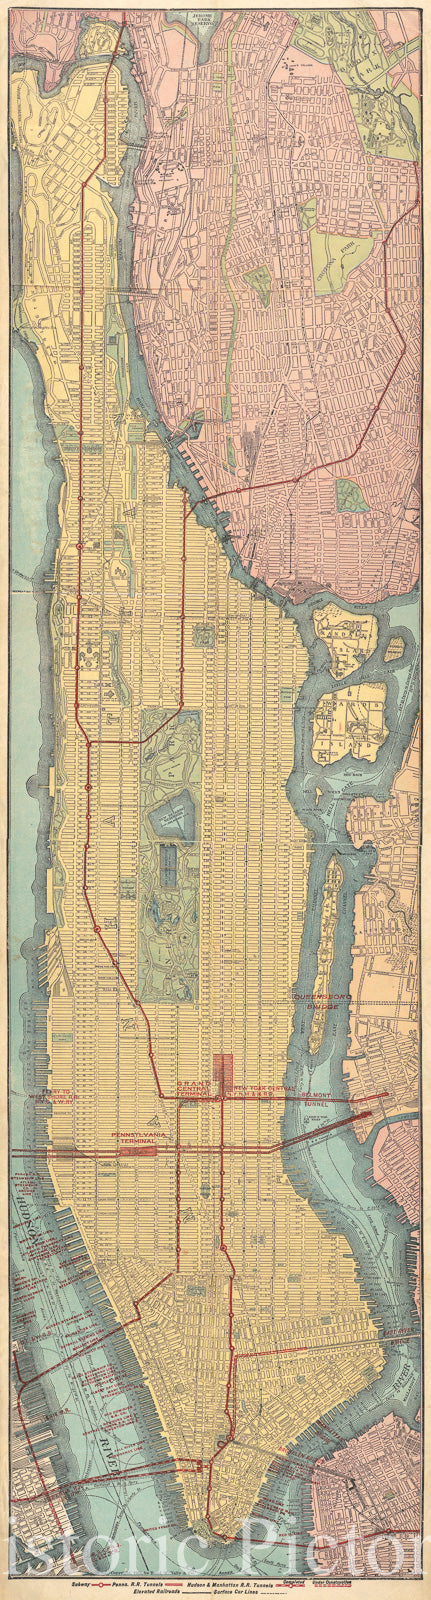 Historic 1908 Map - Rapid Transit map of Manhattan and Adjacent districts of New York City